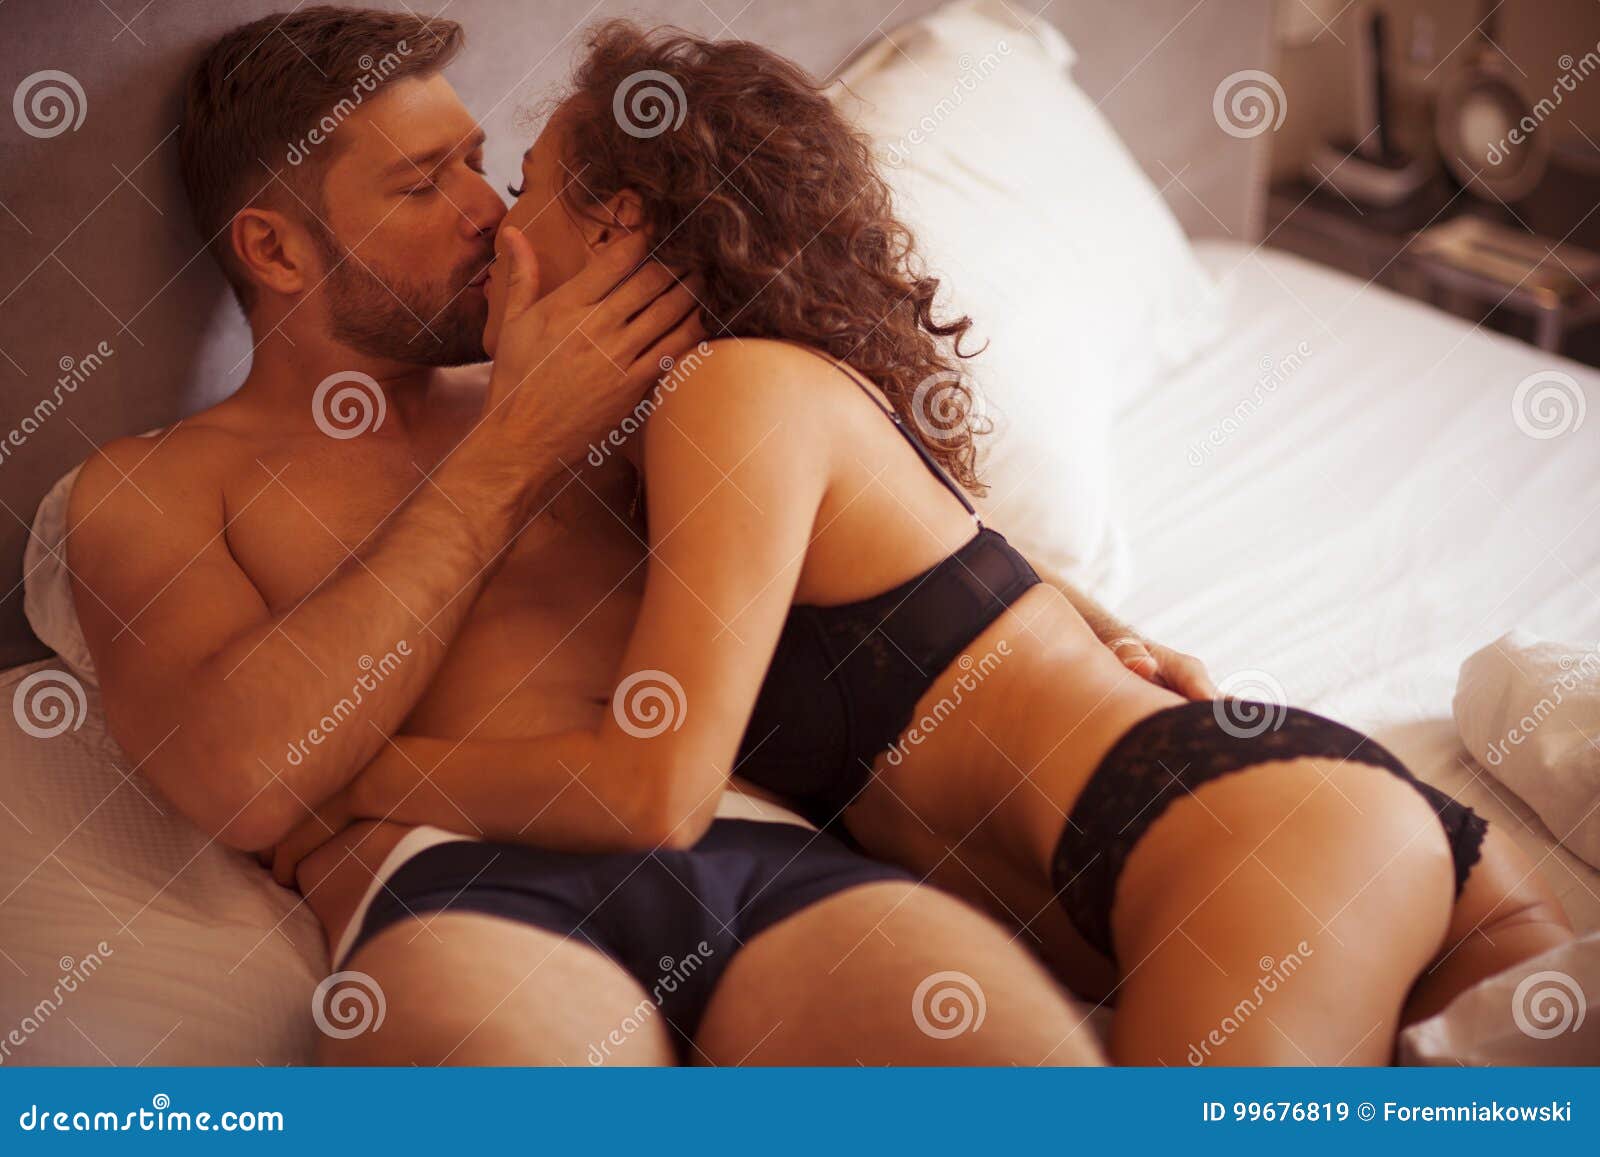 Intimate Couple Making Love in image picture